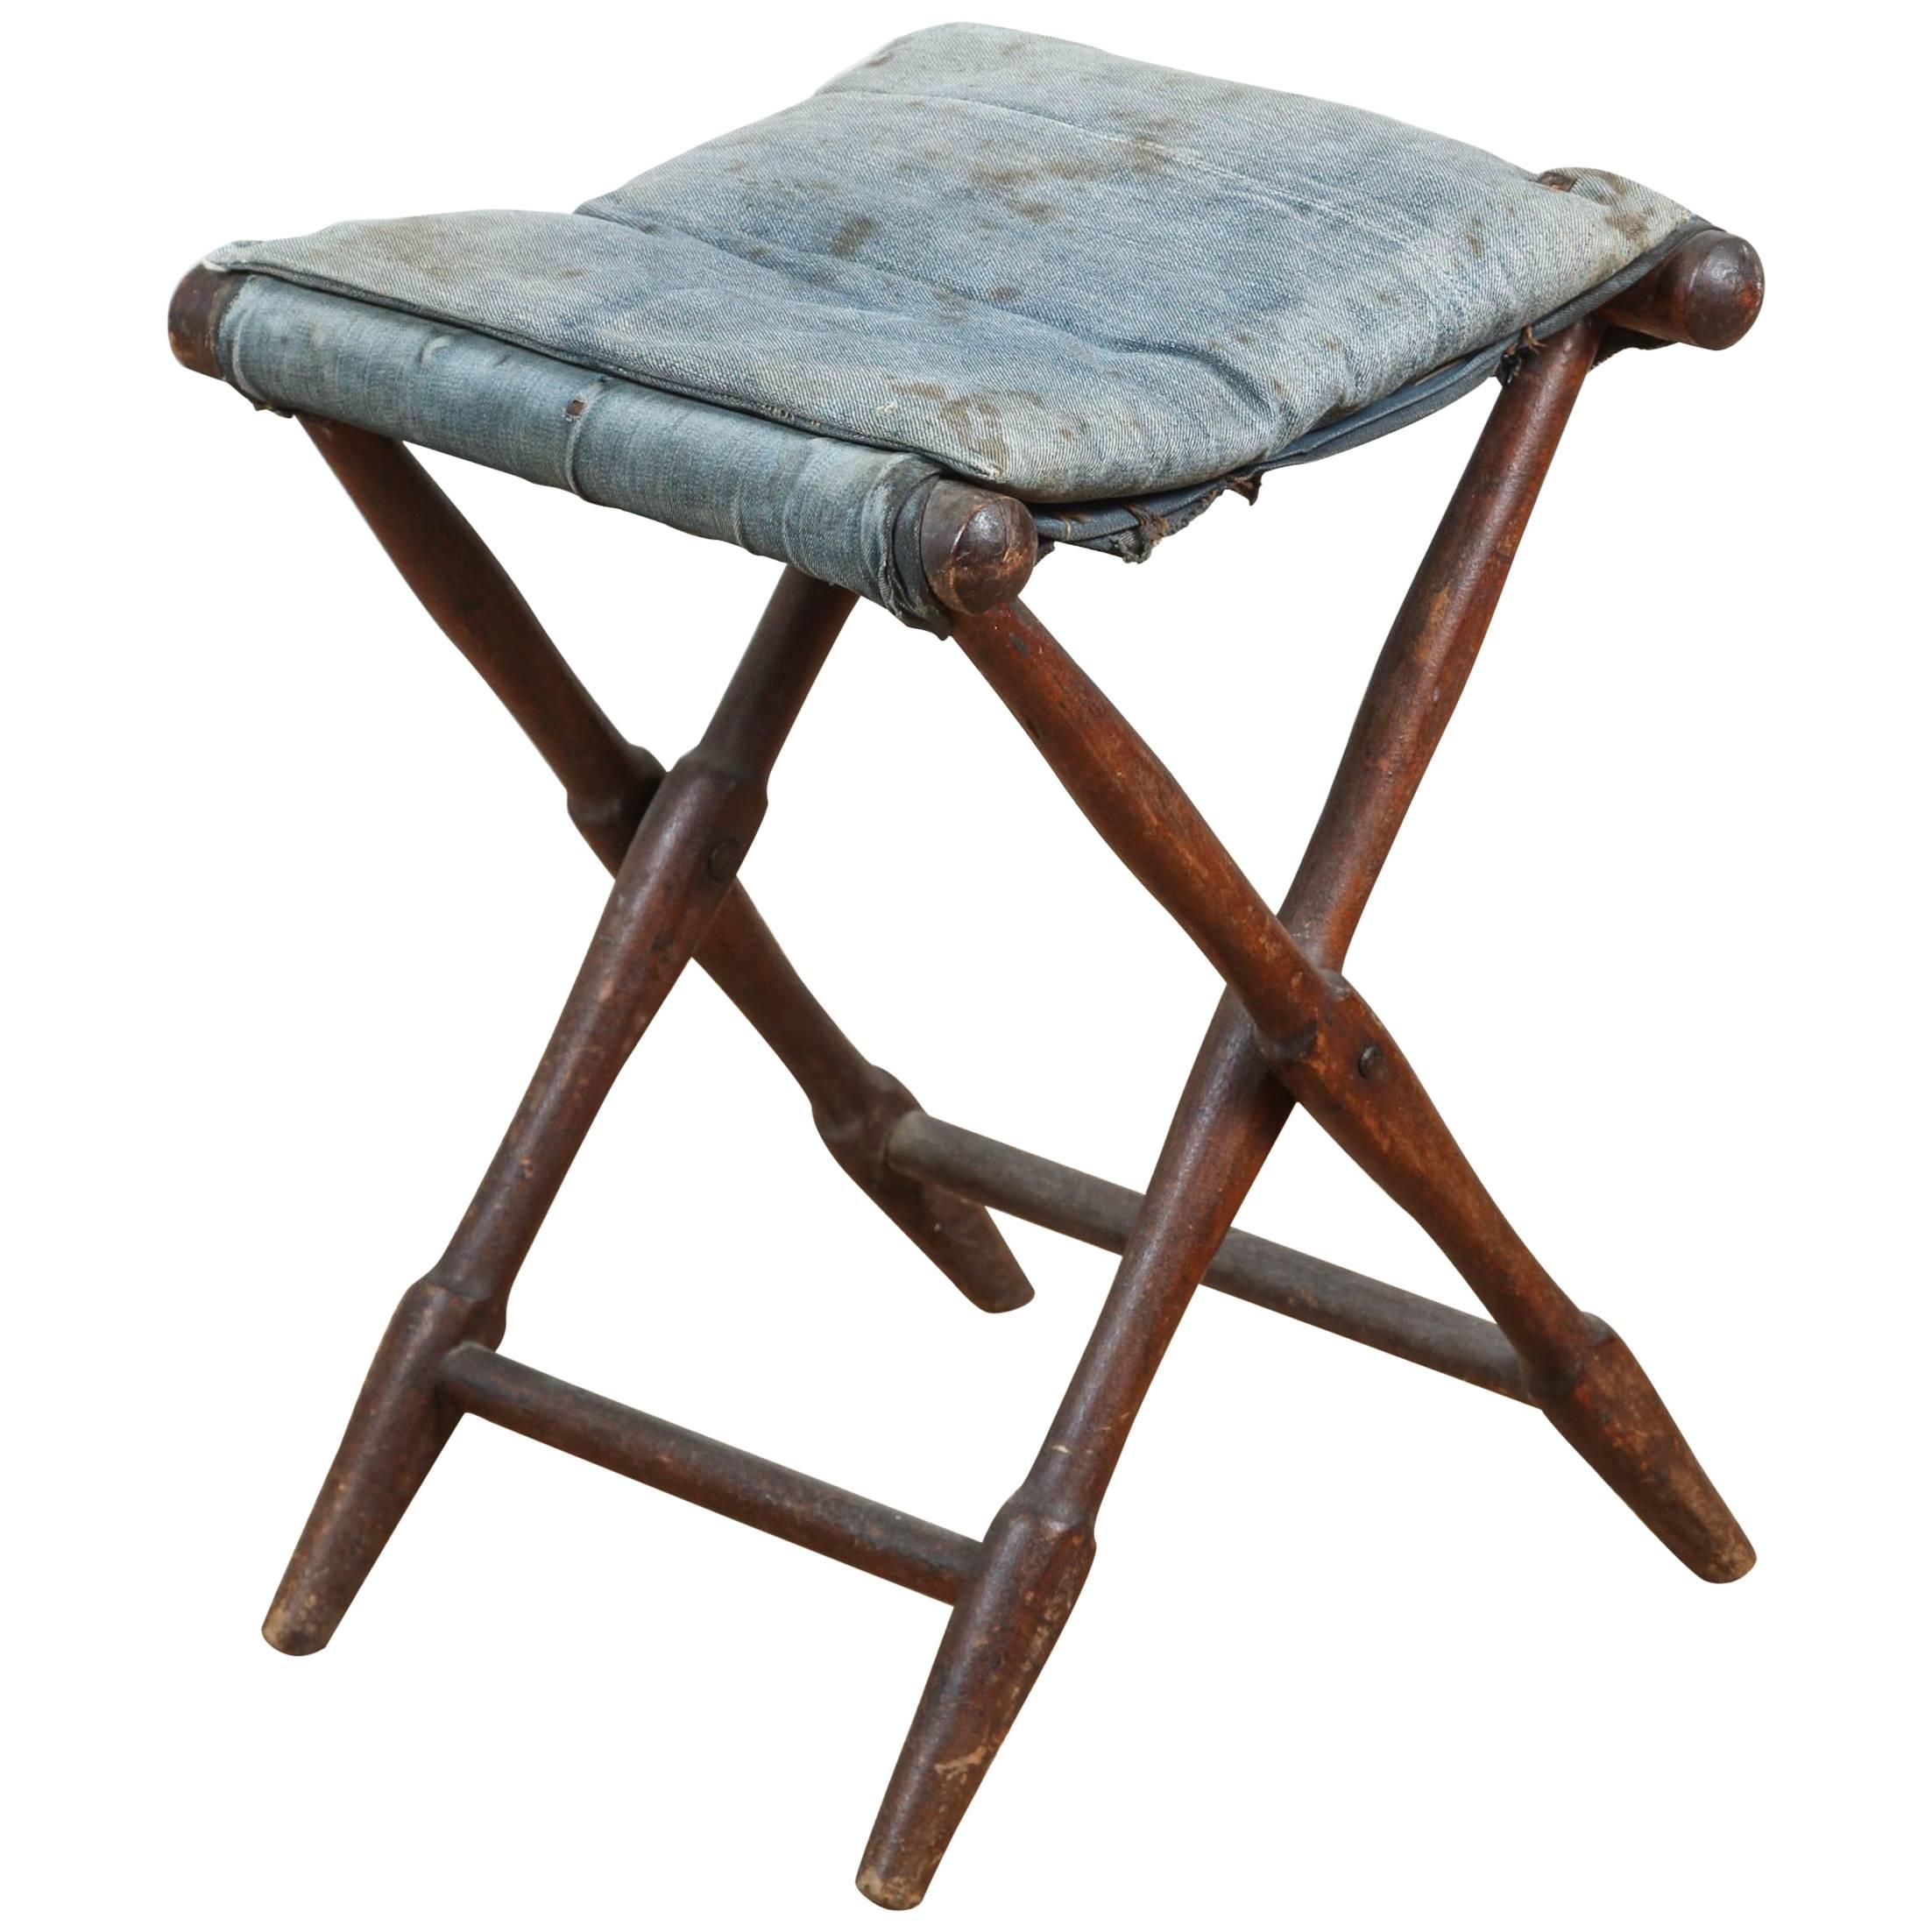 Vintage Folding Stool with Distressed and Faded Denim For Sale